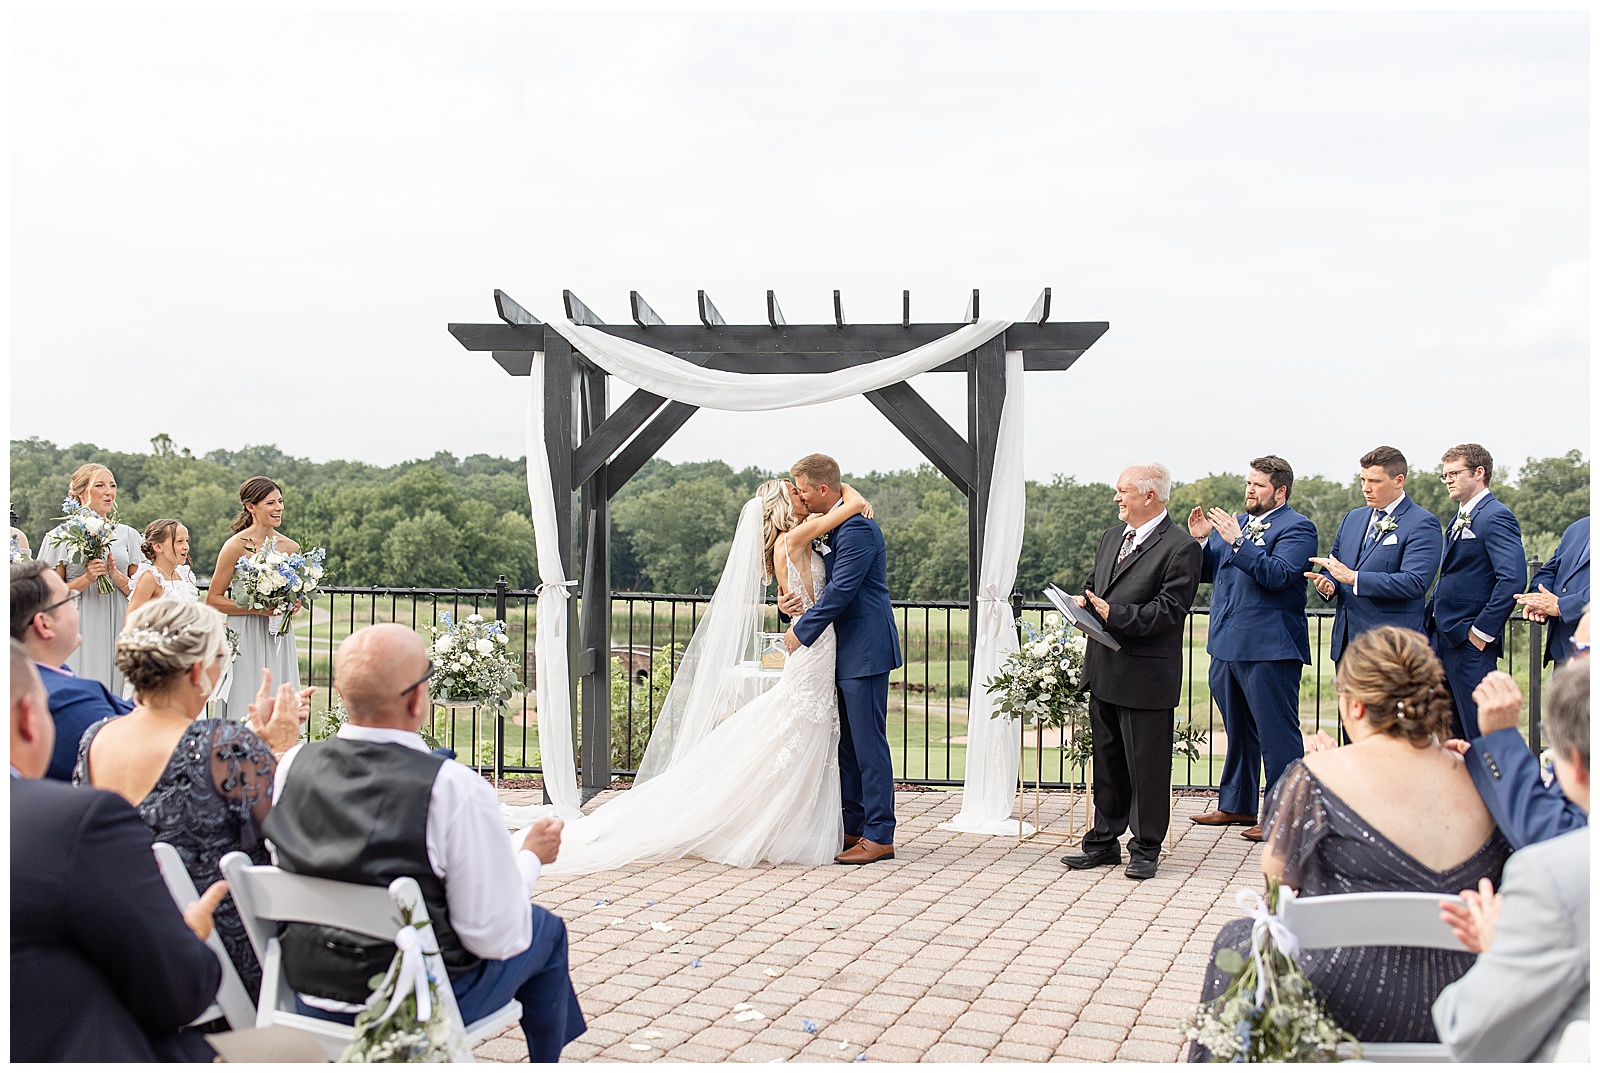 couple sharing their first kiss during outdoor wedding ceremony under wooden display at the links at gettysburg